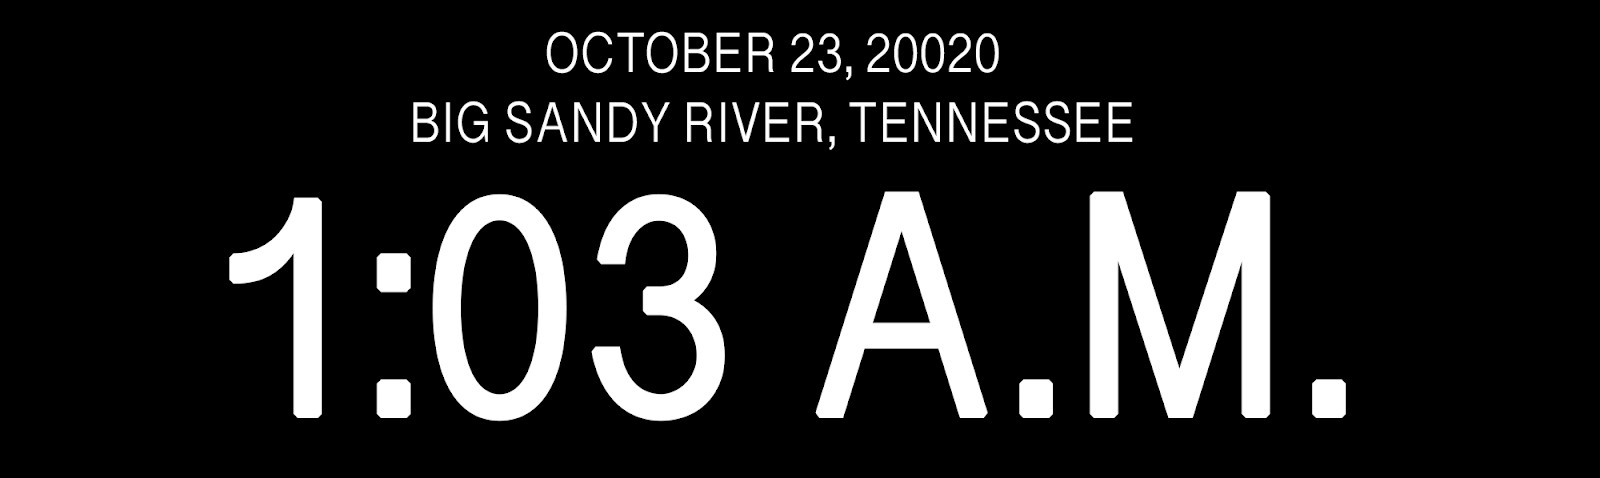 “OCTOBER 23, 20020. BIG SANDY RIVER, TENNESSEE. 1:03 A.M.”